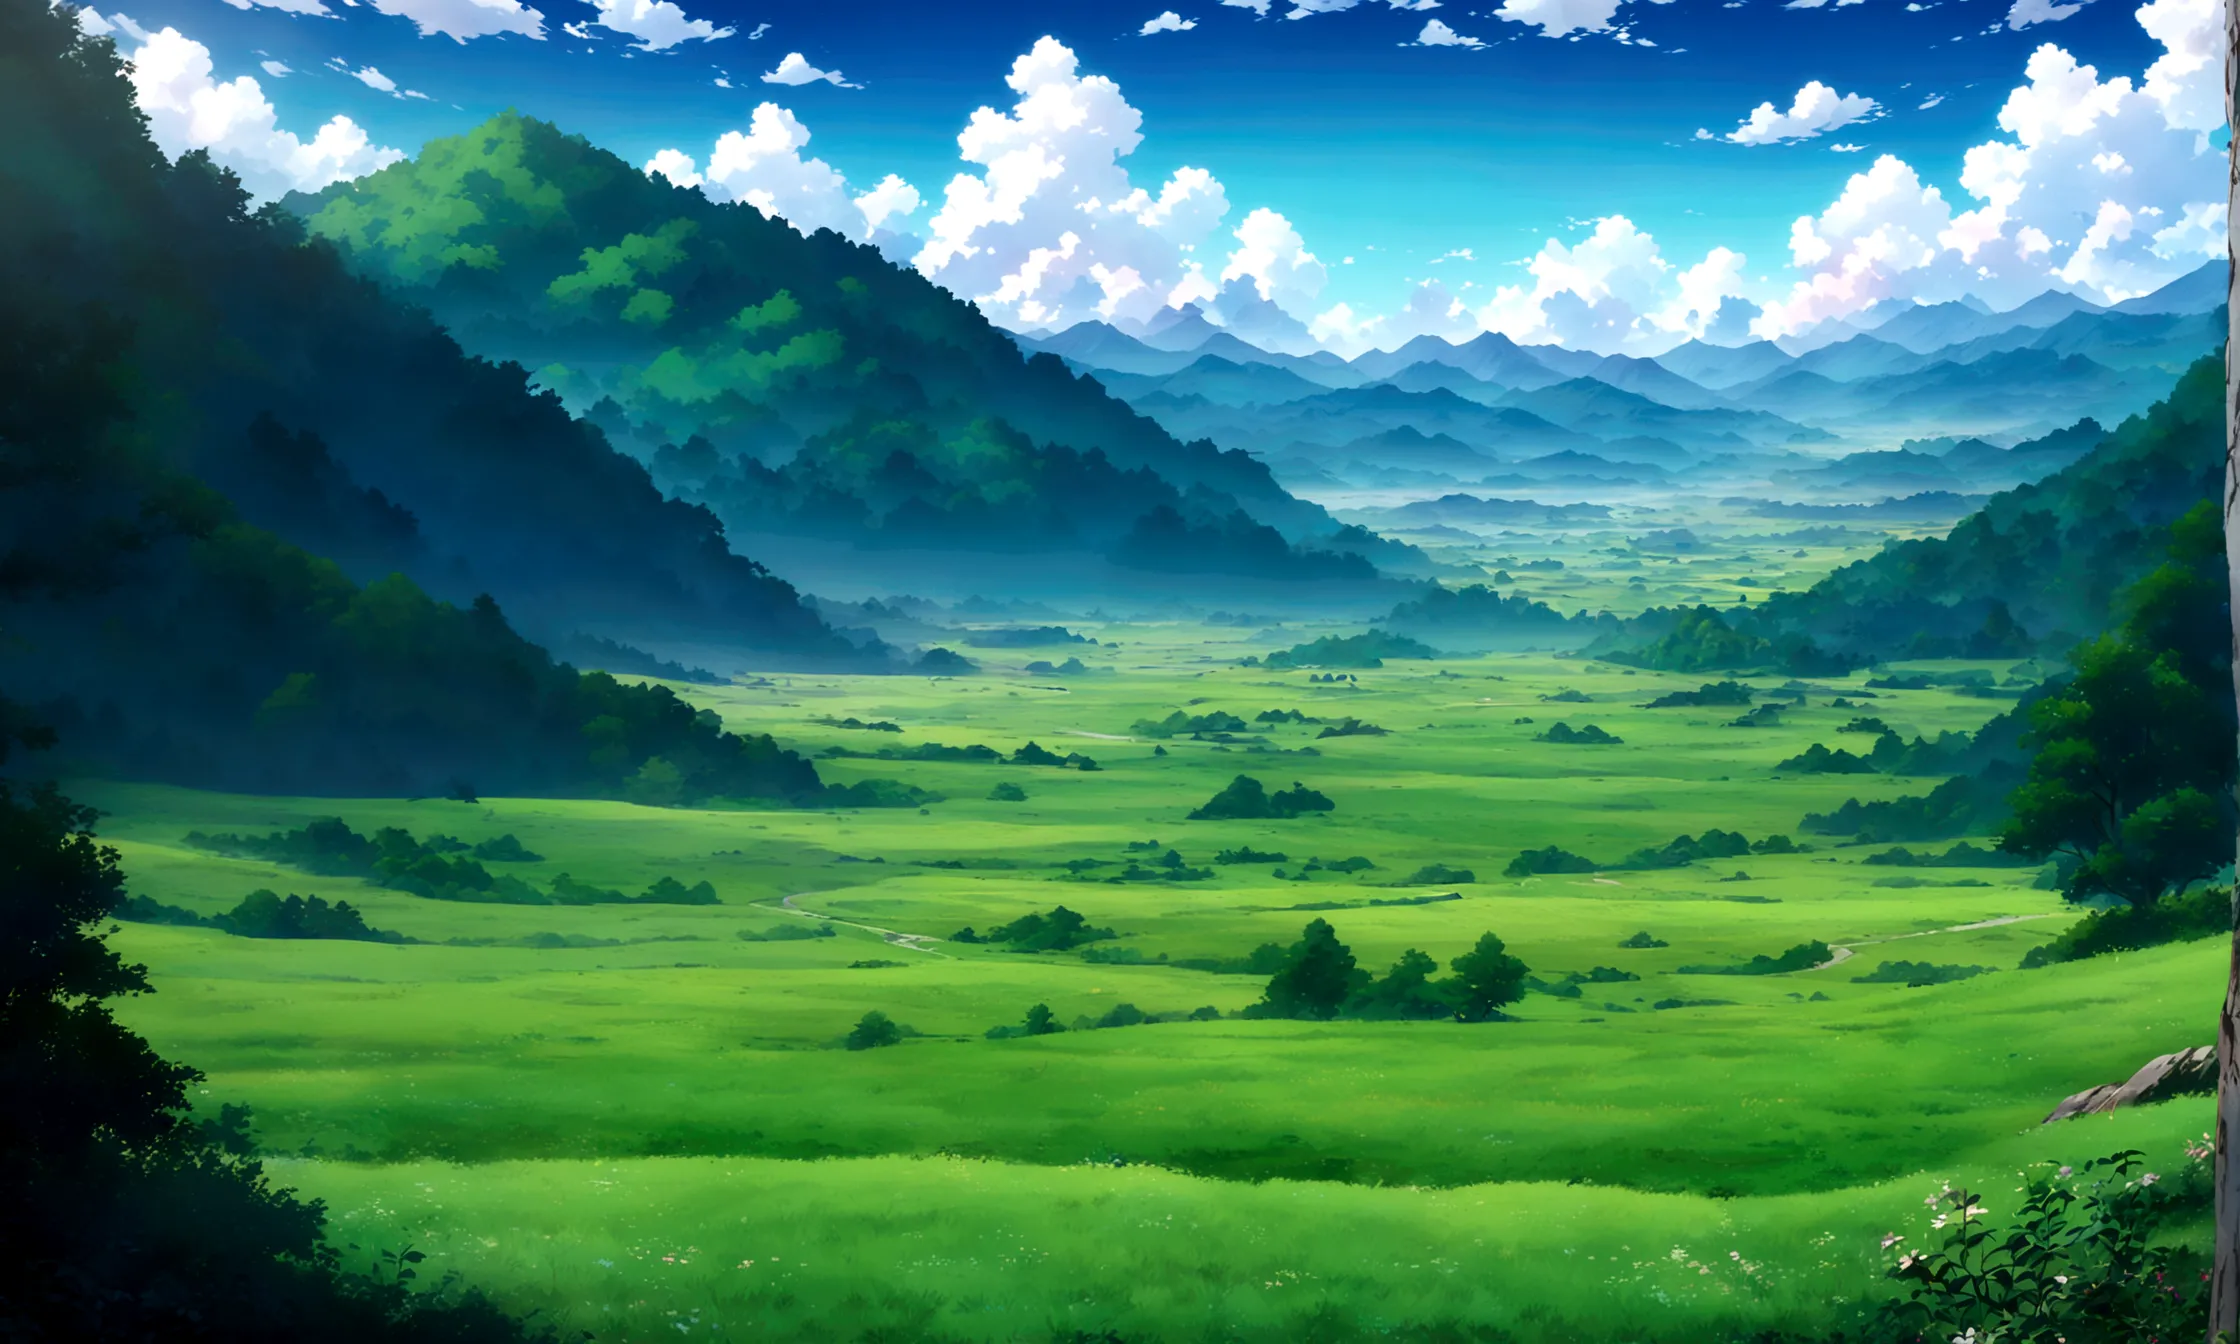 
japanese anime - style painting of beautiful day grassy field,towering mountains in the distance,lush forests, An expansive ope...